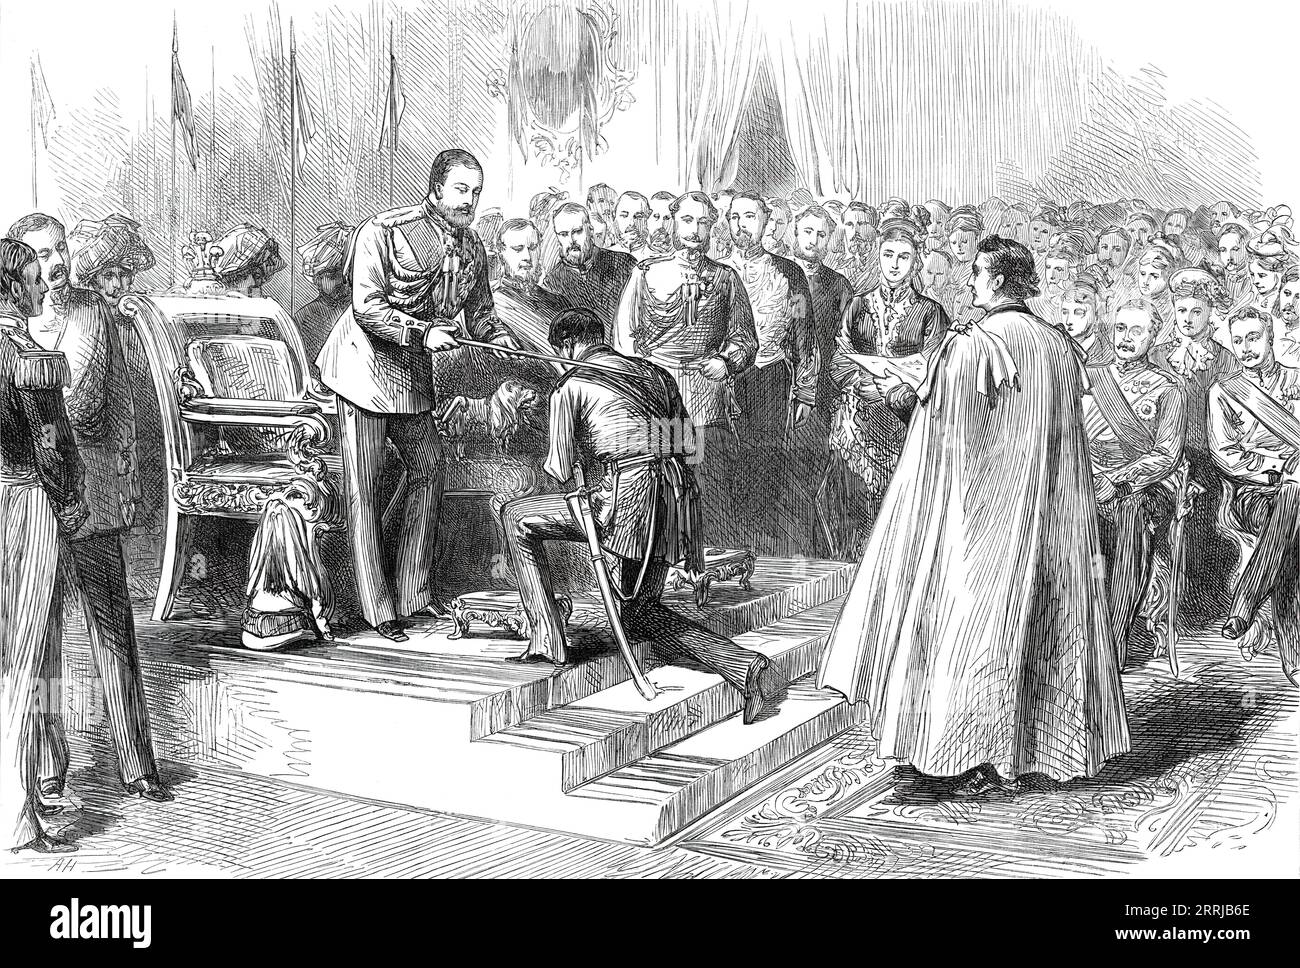 The Prince of Wales in India: Chapter of the Star of India at Allahabad, from a sketch by one of our special artists,  1876. The future King Edward VII '...held a Chapter of the Star of India, when Major-Generals Browne and Probyn and Dr. Fayrer were invested with the rank of Knight Commander; and Colonels Michael, Earle, and Ellis, Captains Glyn and Baring, and Majors Henderson and Bradford, with the rank of Companions of this order. The ceremony passed off well, but was comparatively private, being held at Government House'. From &quot;Illustrated London News&quot;, 1876. Stock Photo